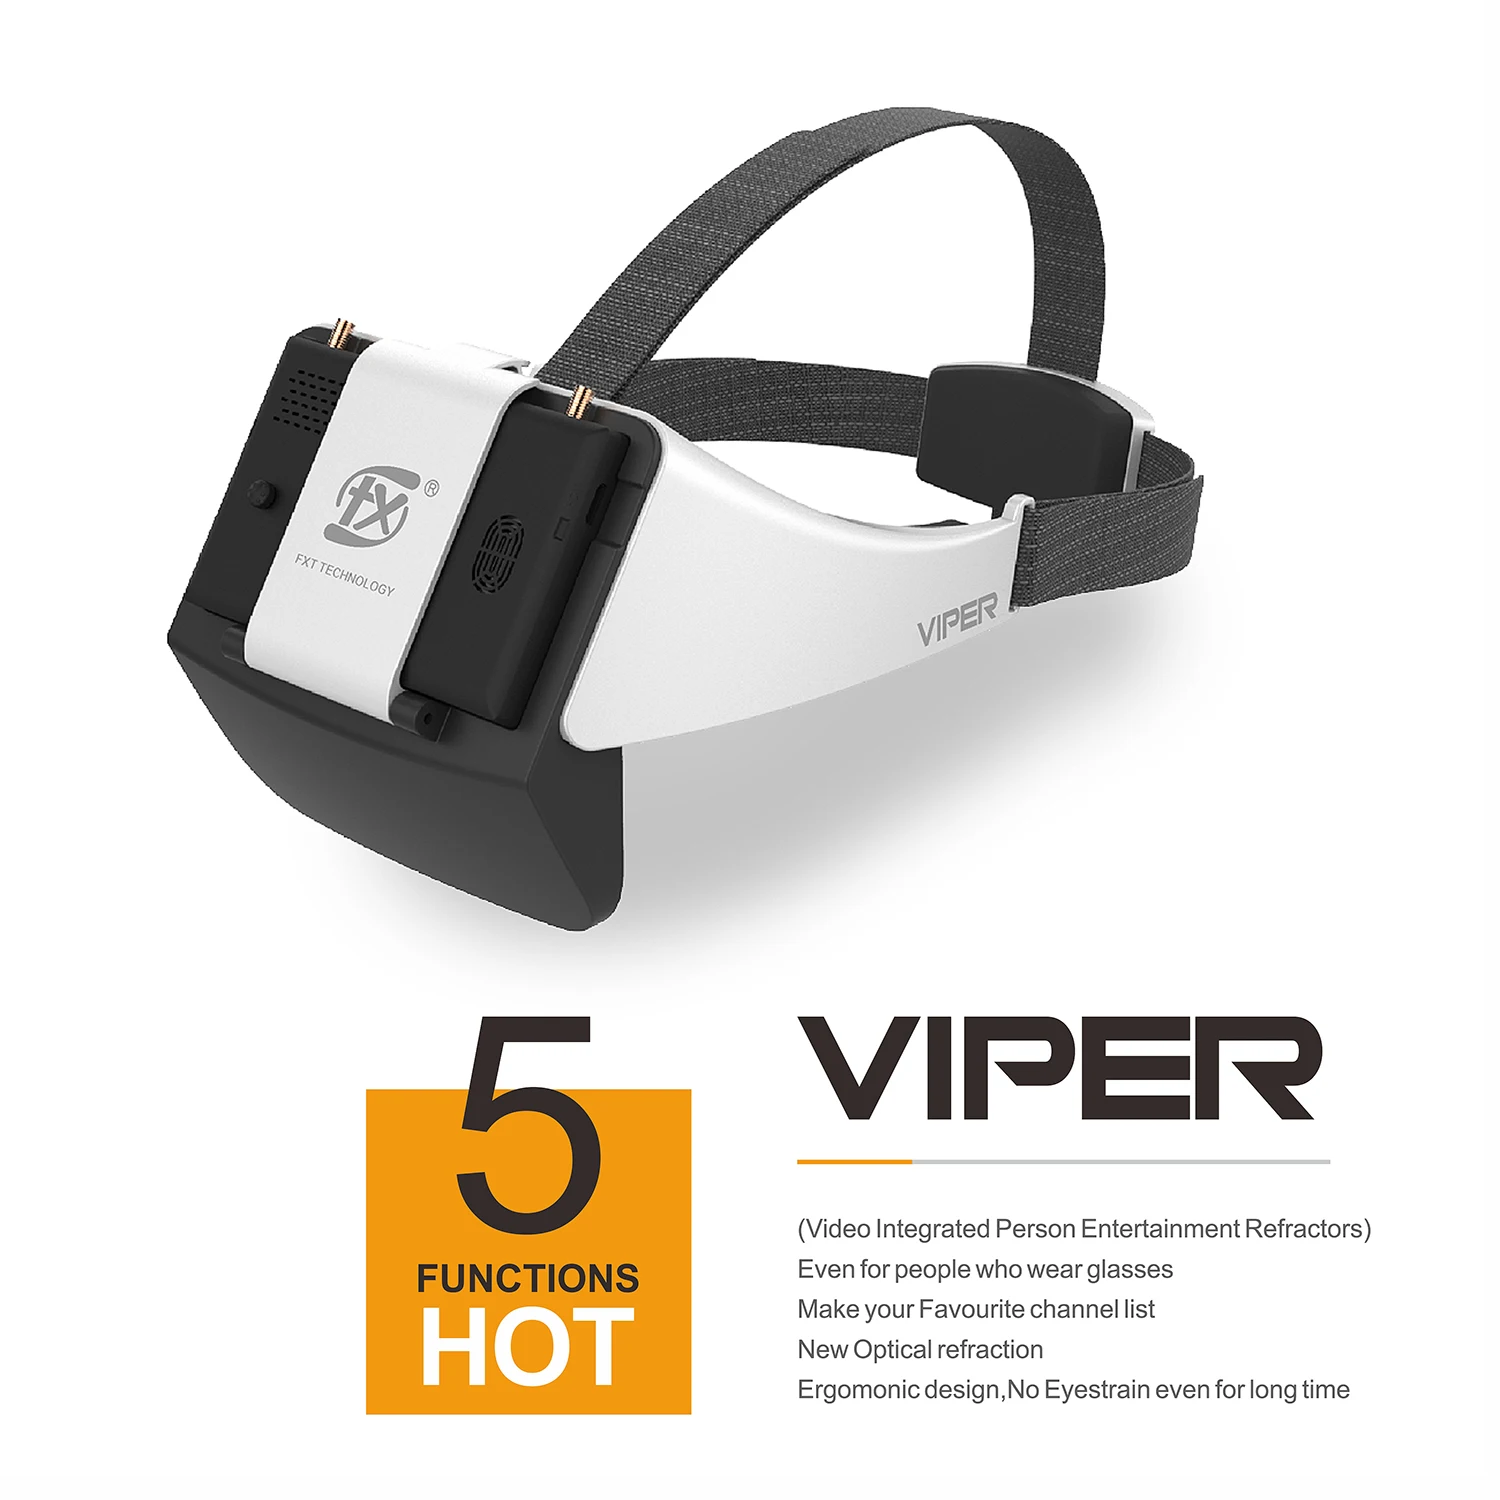 FXT 5.8G VIPER 5 inches FPV goggle video glasses Support Wearing glasses with DVR recording